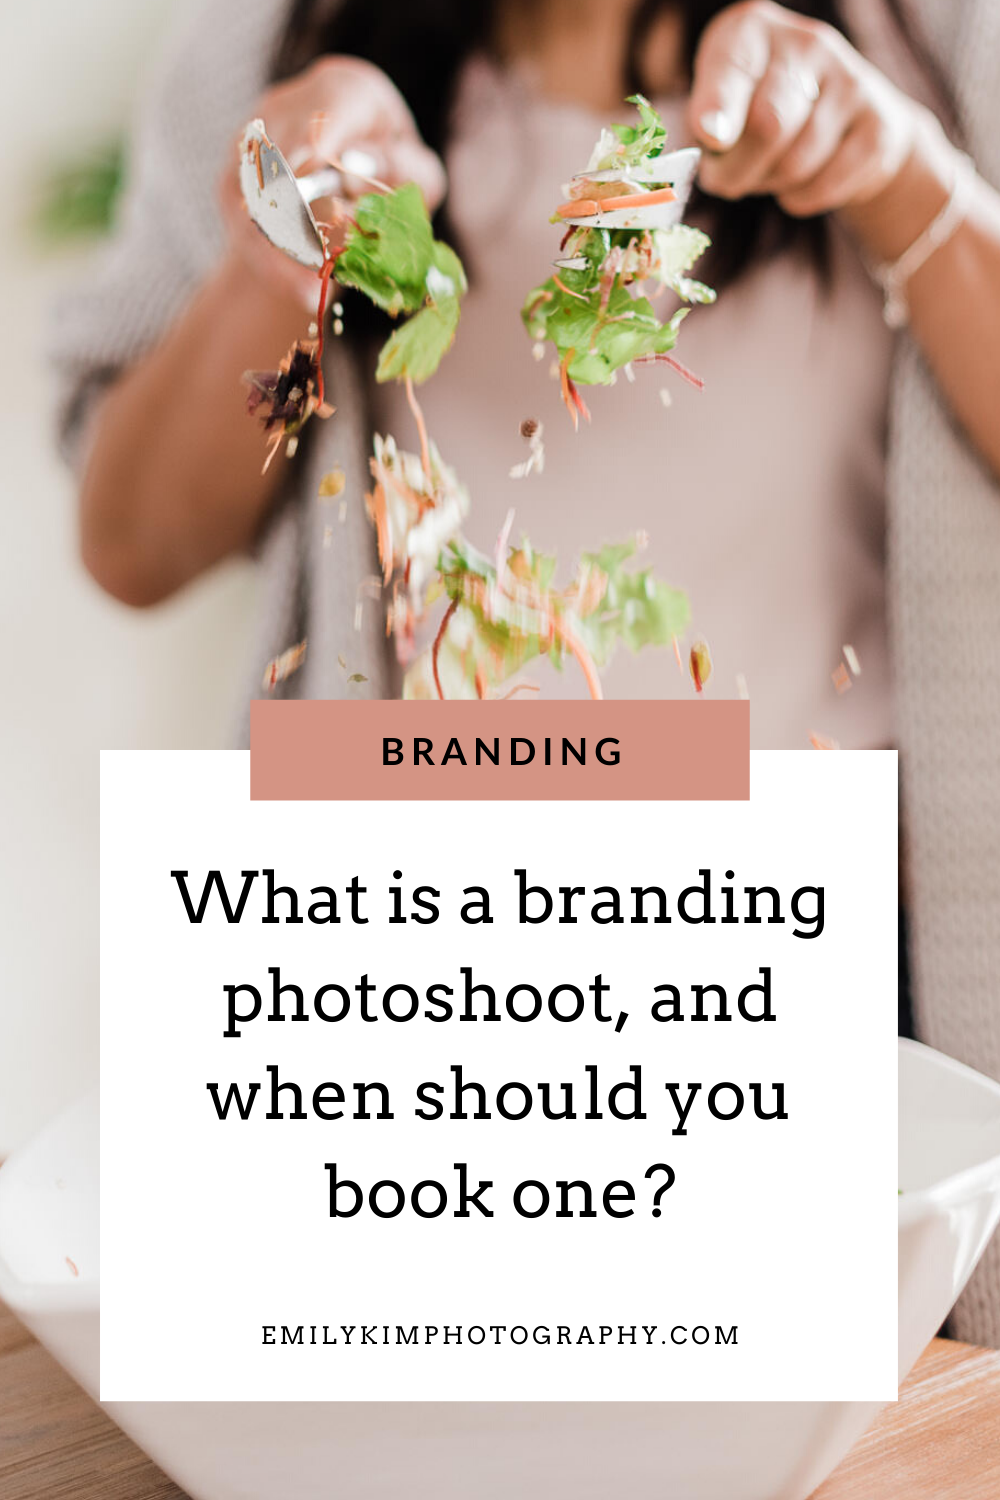 A graphic with the headline, "What is a branding photoshoot, and when should you book one?" The background image is a close up of a woman tossing salad.